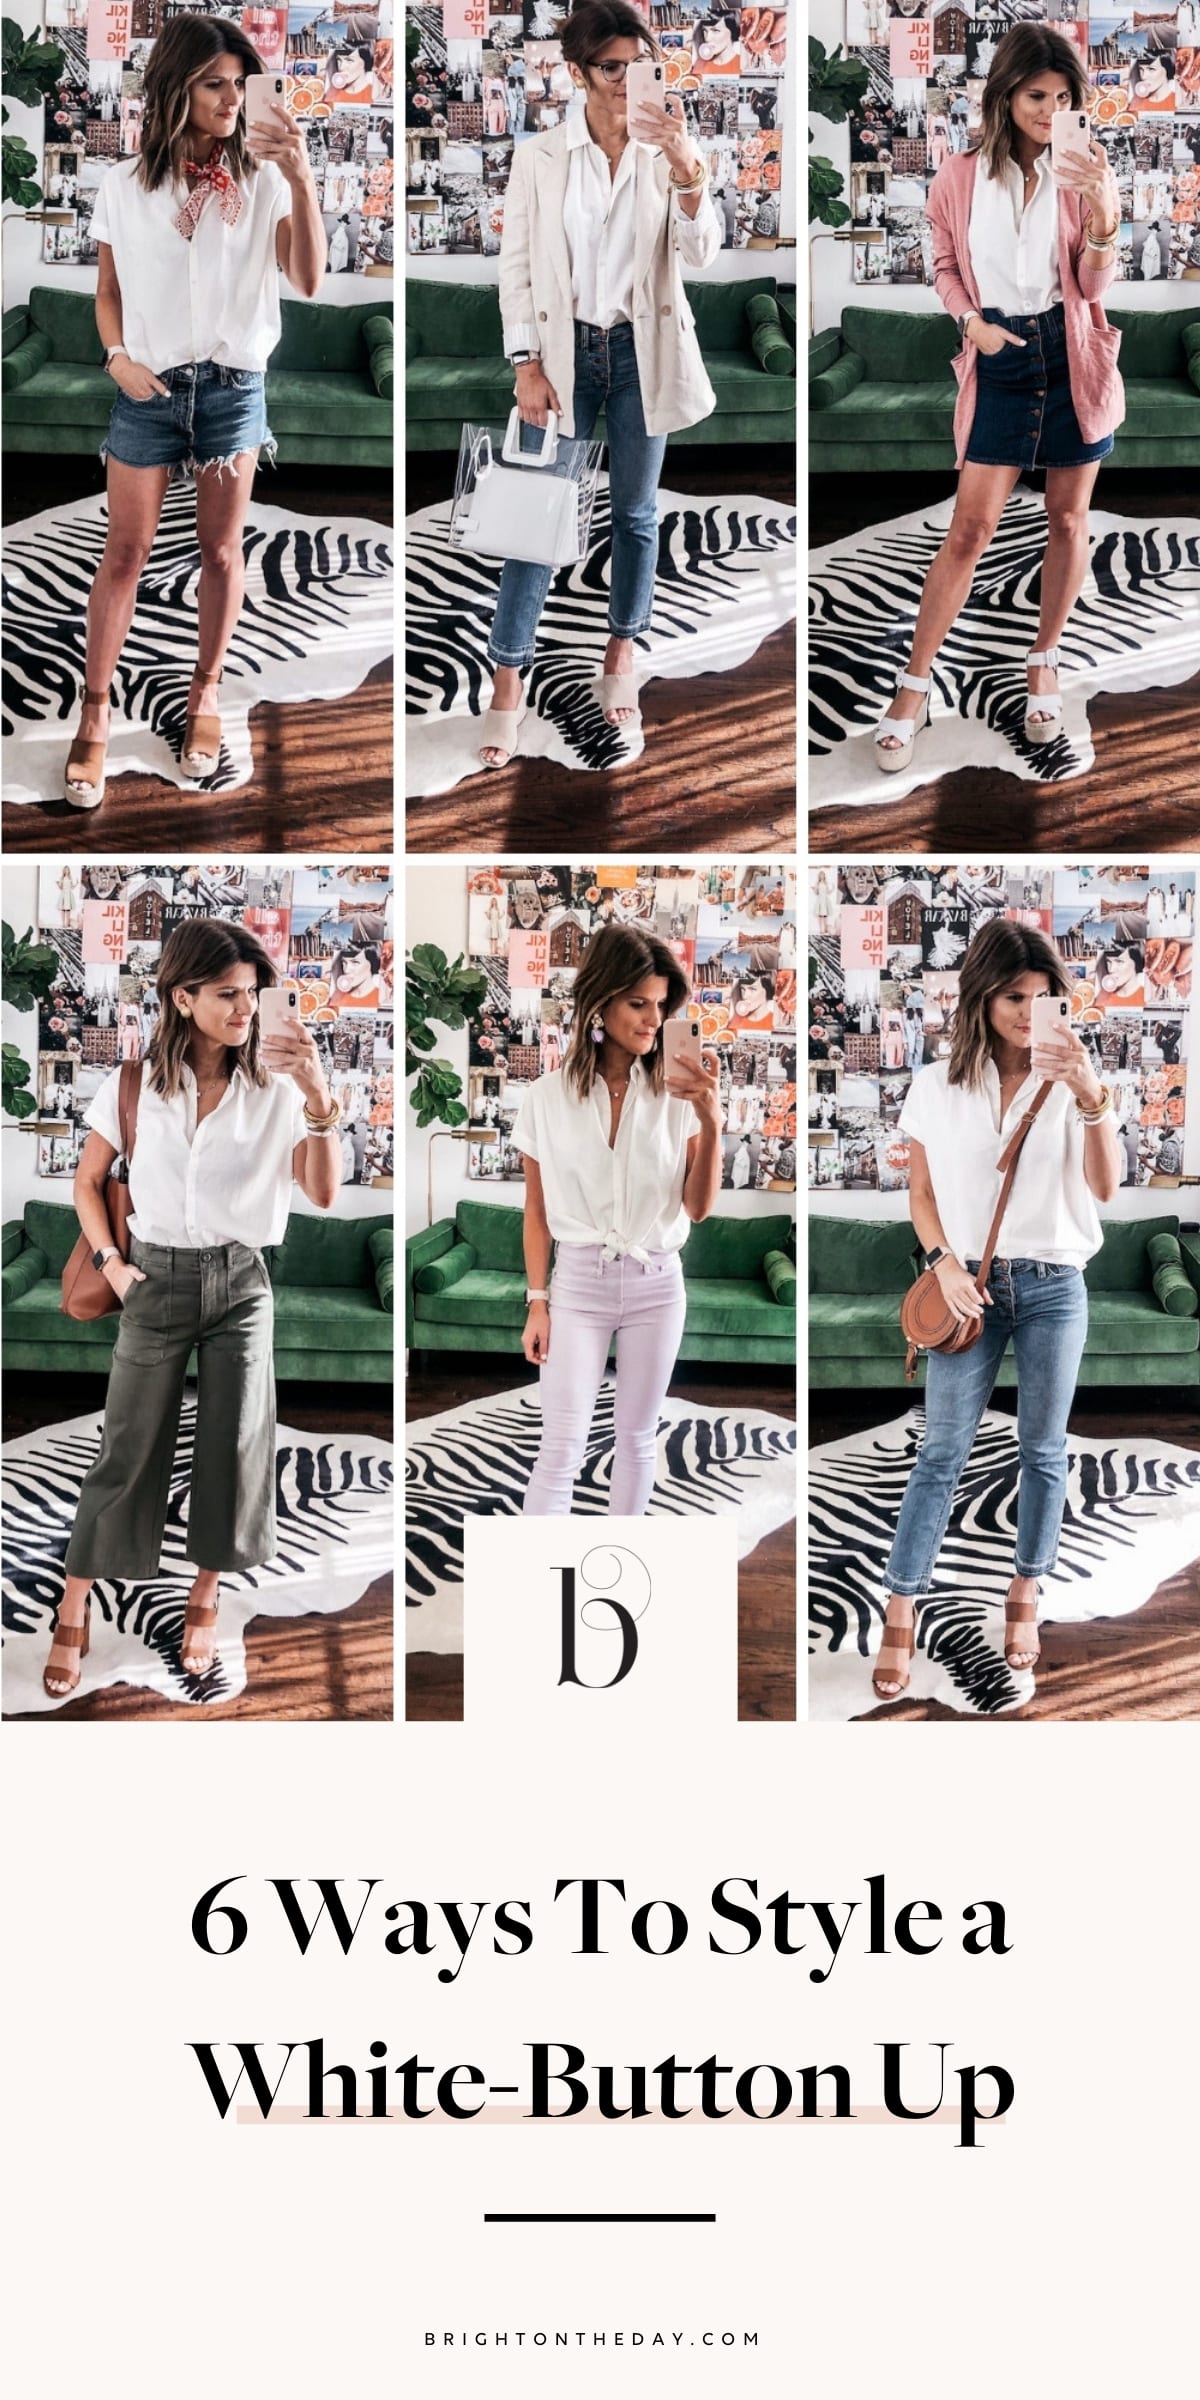 6 ways to style a white button up